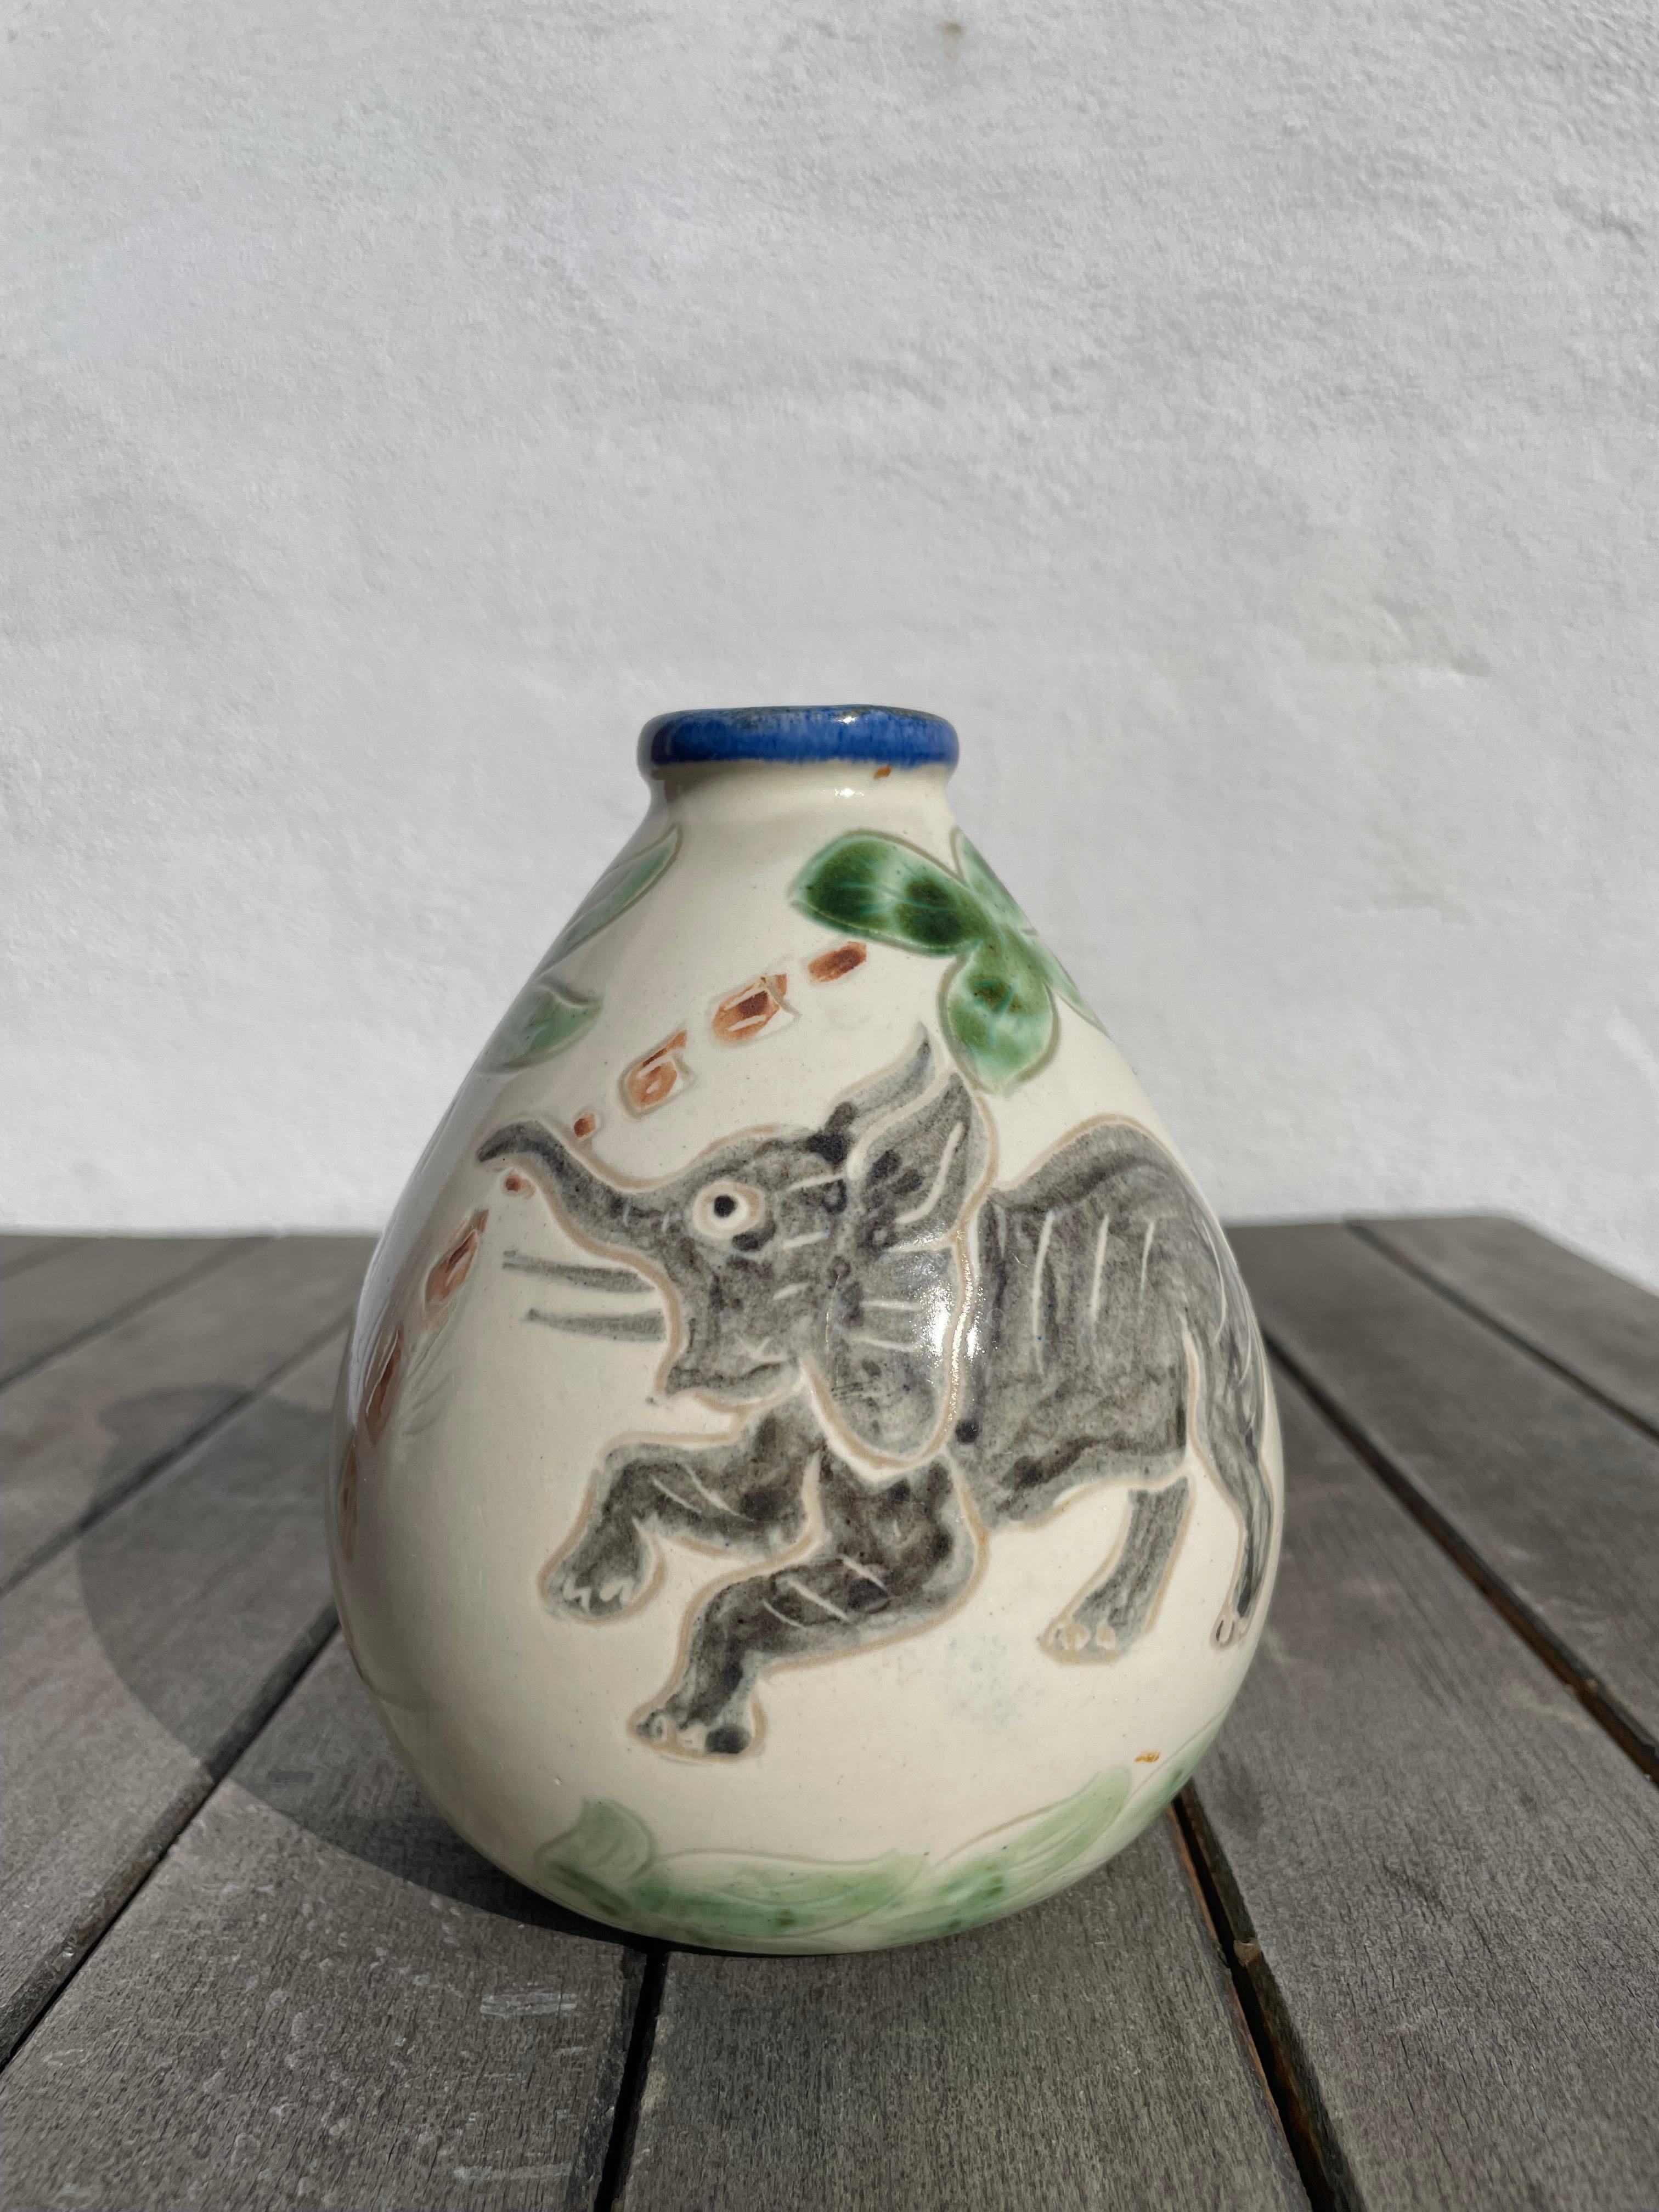 Danish Grimstrup Hand-Decorated Vase with Elephants, Palmtrees, Leaves, 1950s For Sale